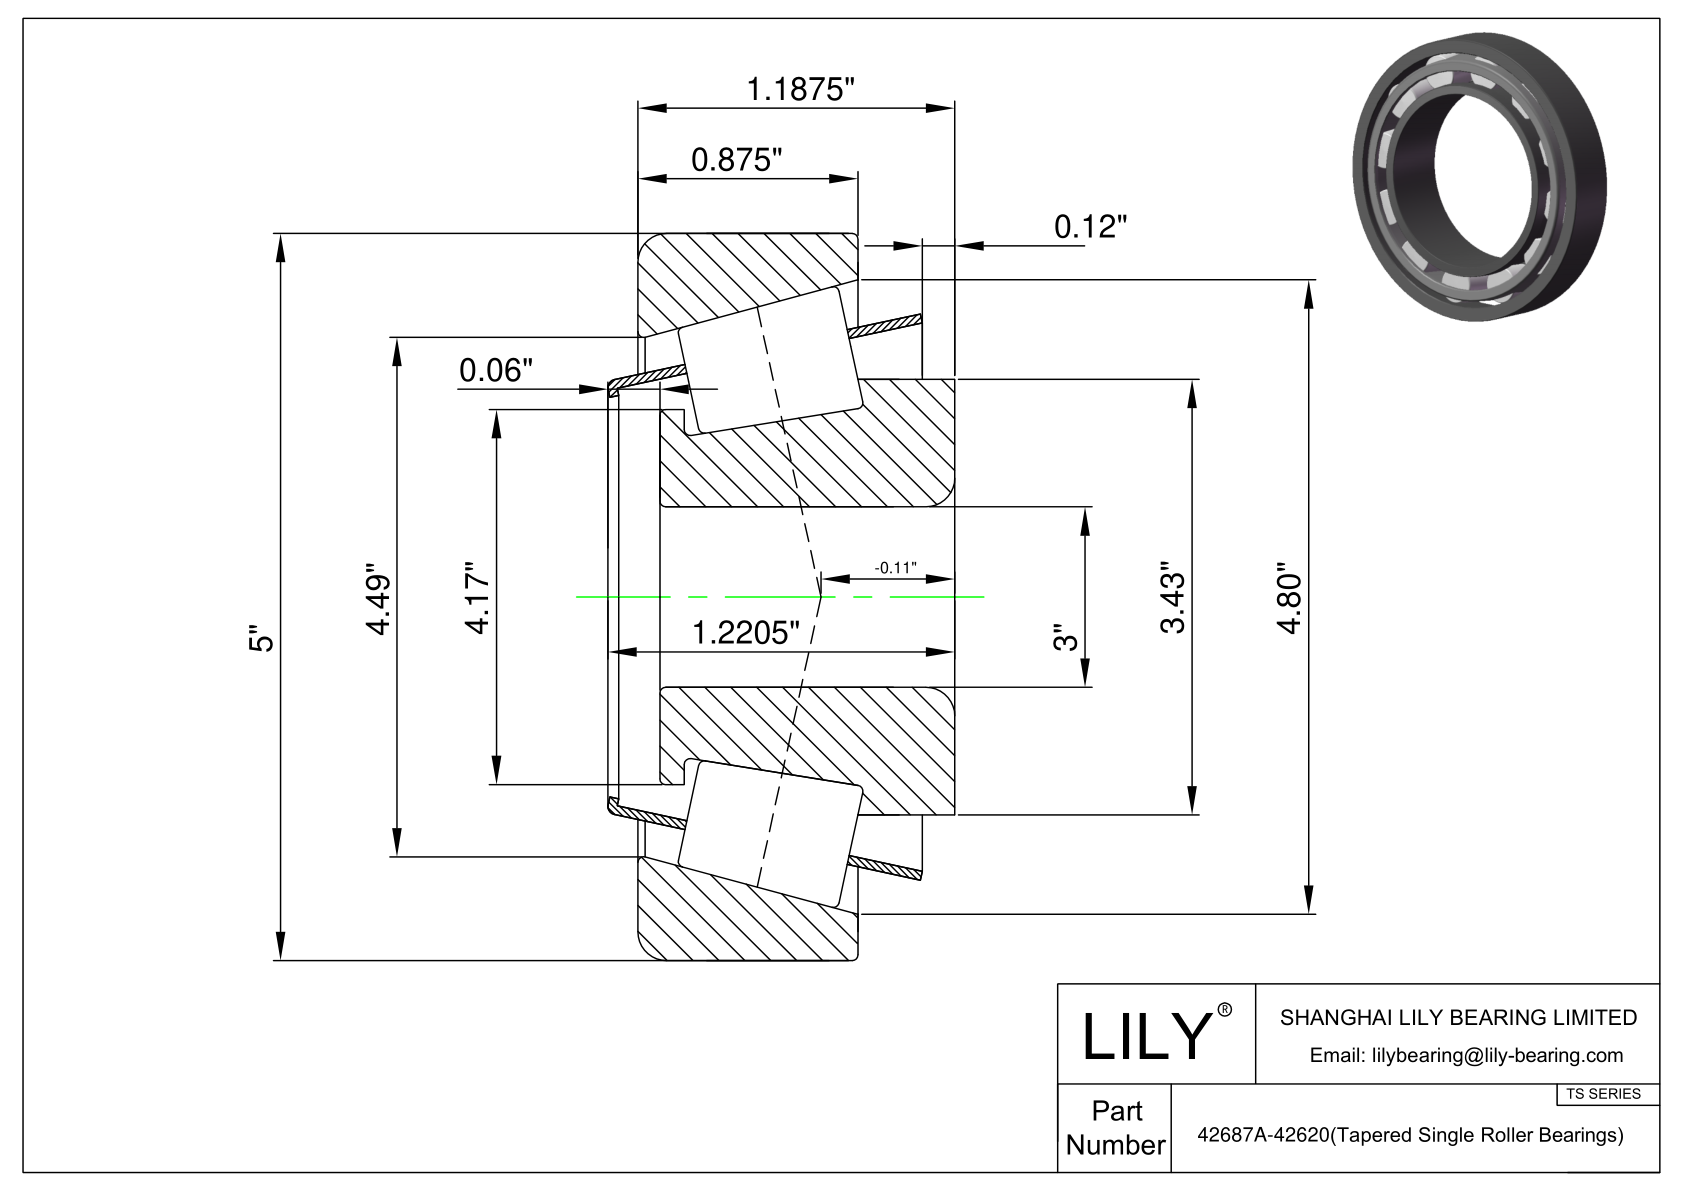 42687A-42620 TS (Tapered Single Roller Bearings) (Imperial) cad drawing